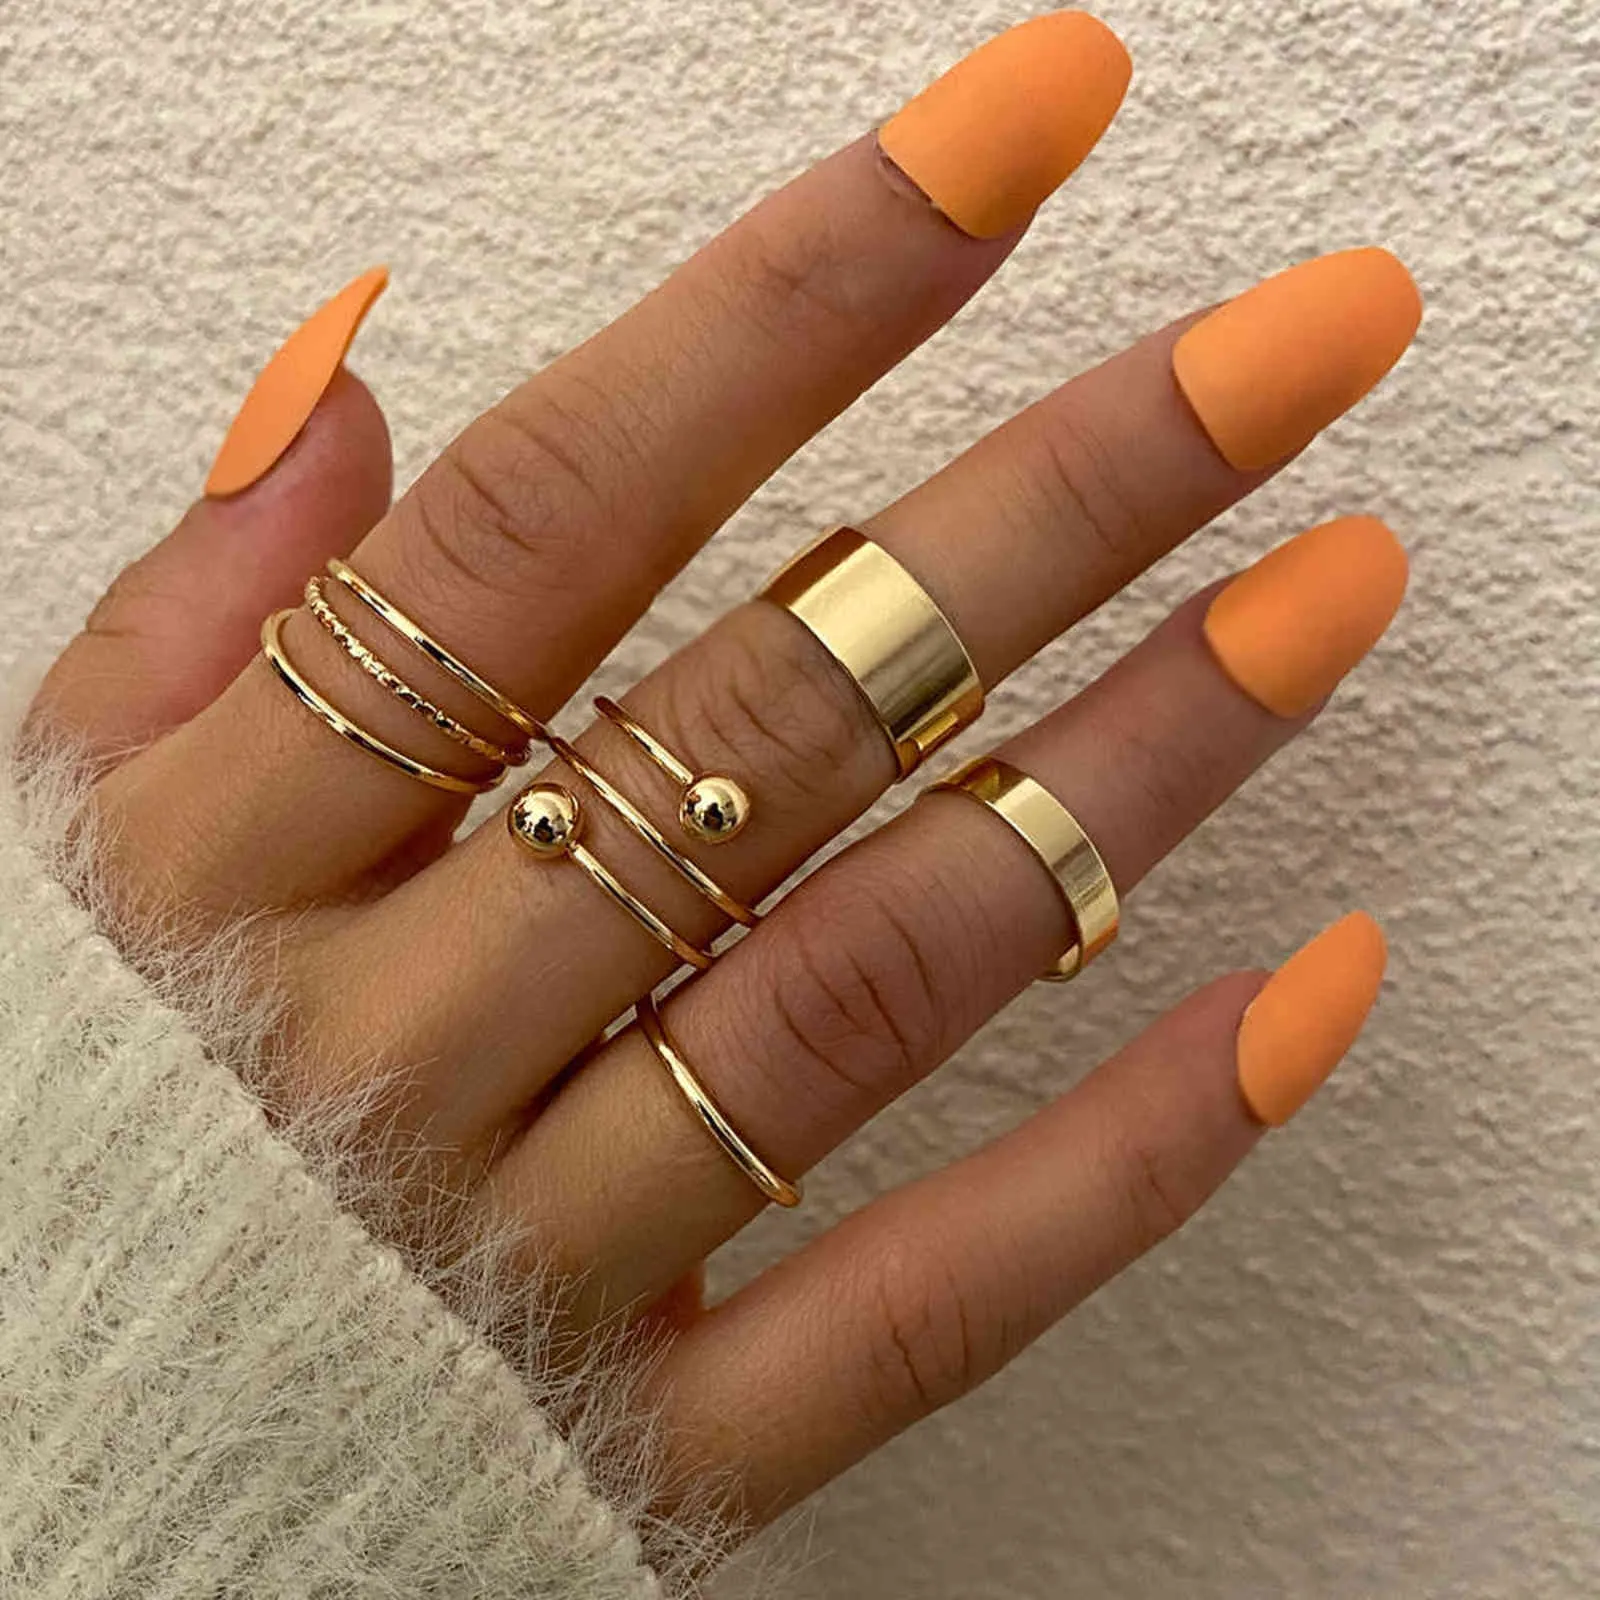 Vintage Metal Gold Wide Knuckle Ring Set For Women Punk Cross Twisted Crystal Finger Ring Bohemian Fashion Jewelry Gift G1125